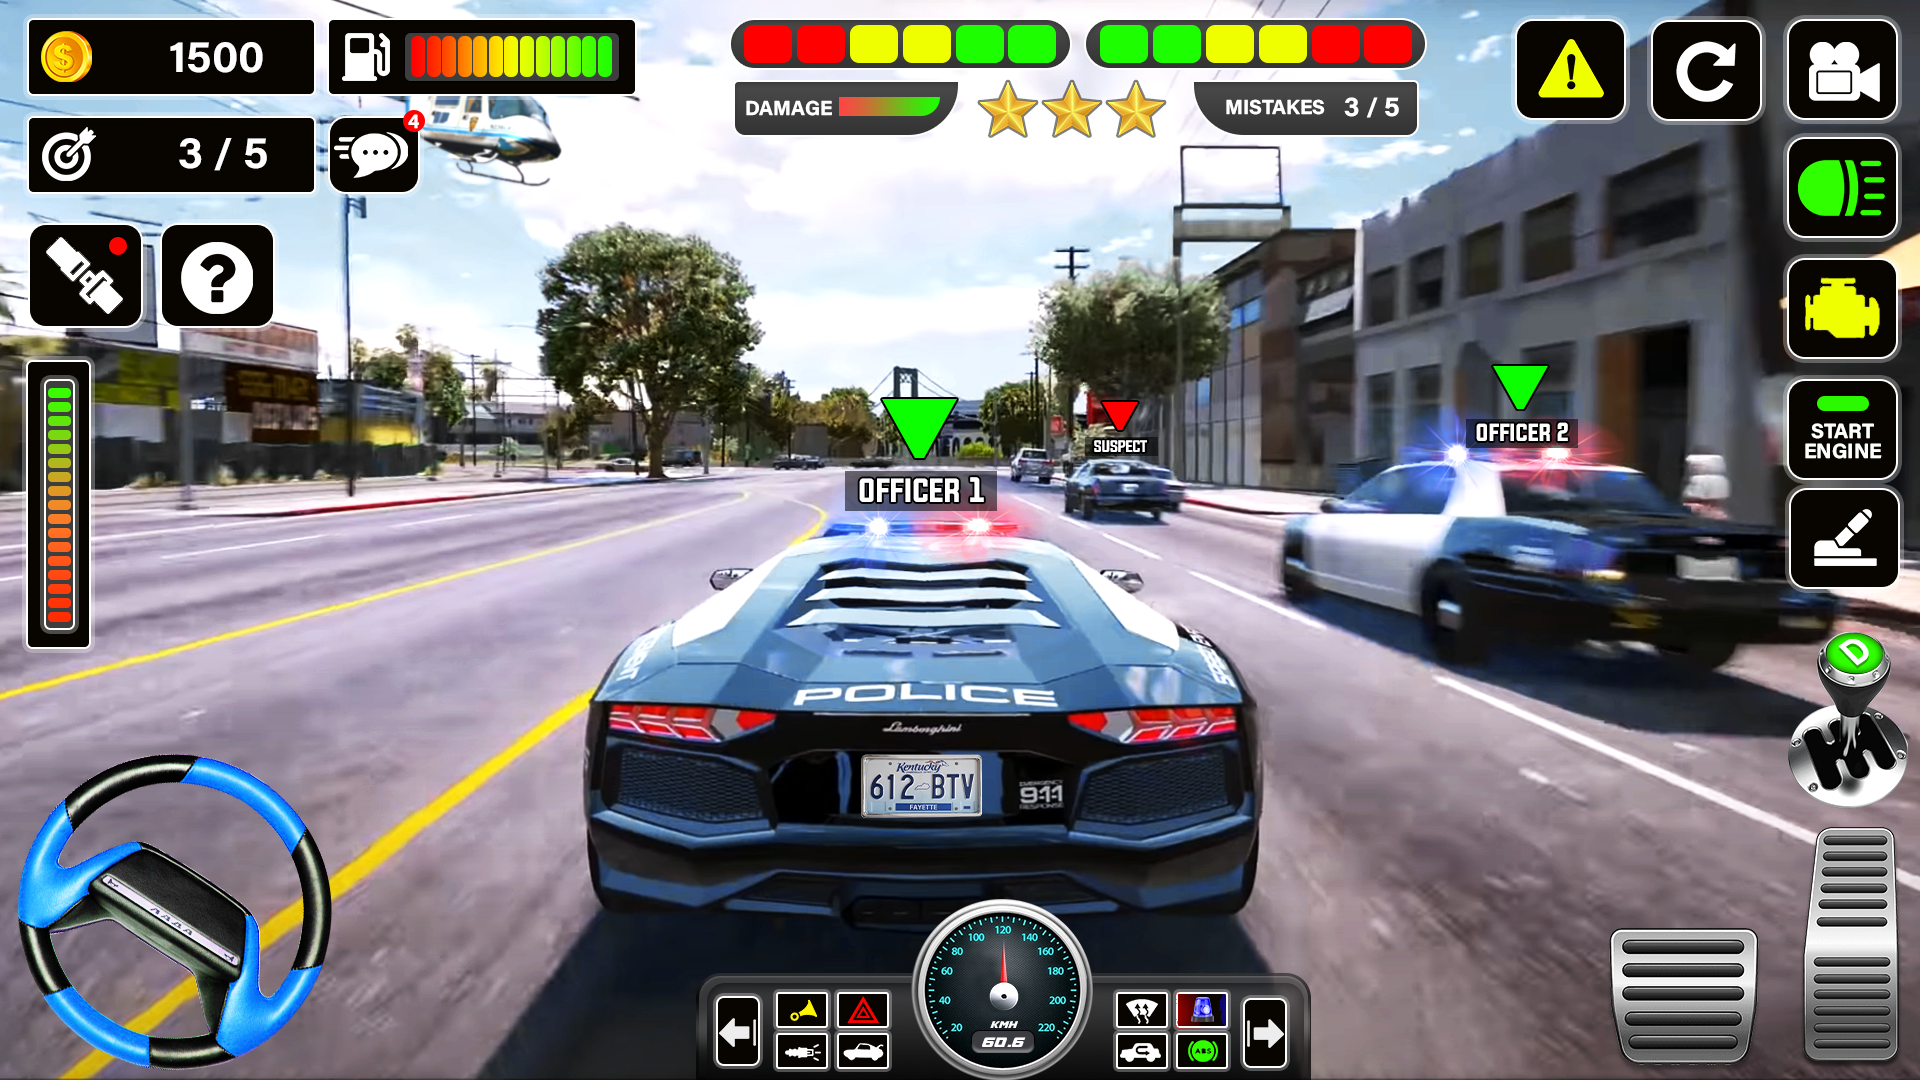 Screenshot of Police Car Thief Chase Game